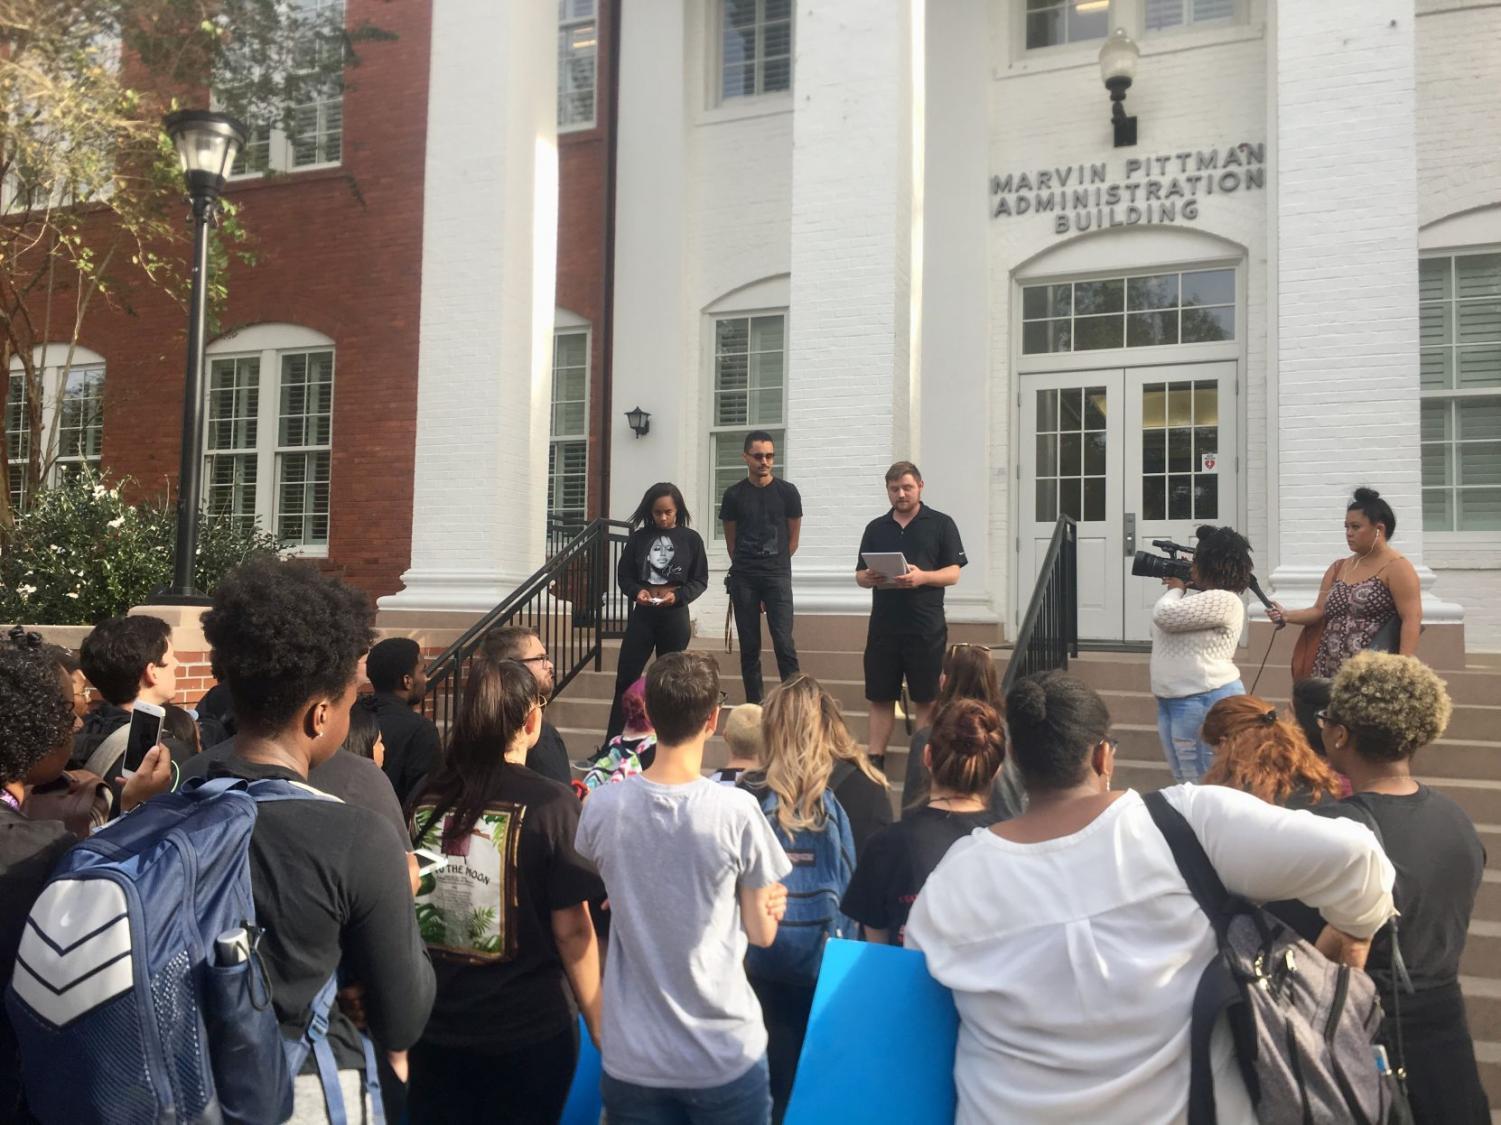 Students+issue+open+letter+to+Georgia+Southern+president+in+response+to+usage+of+N-word+on+campus